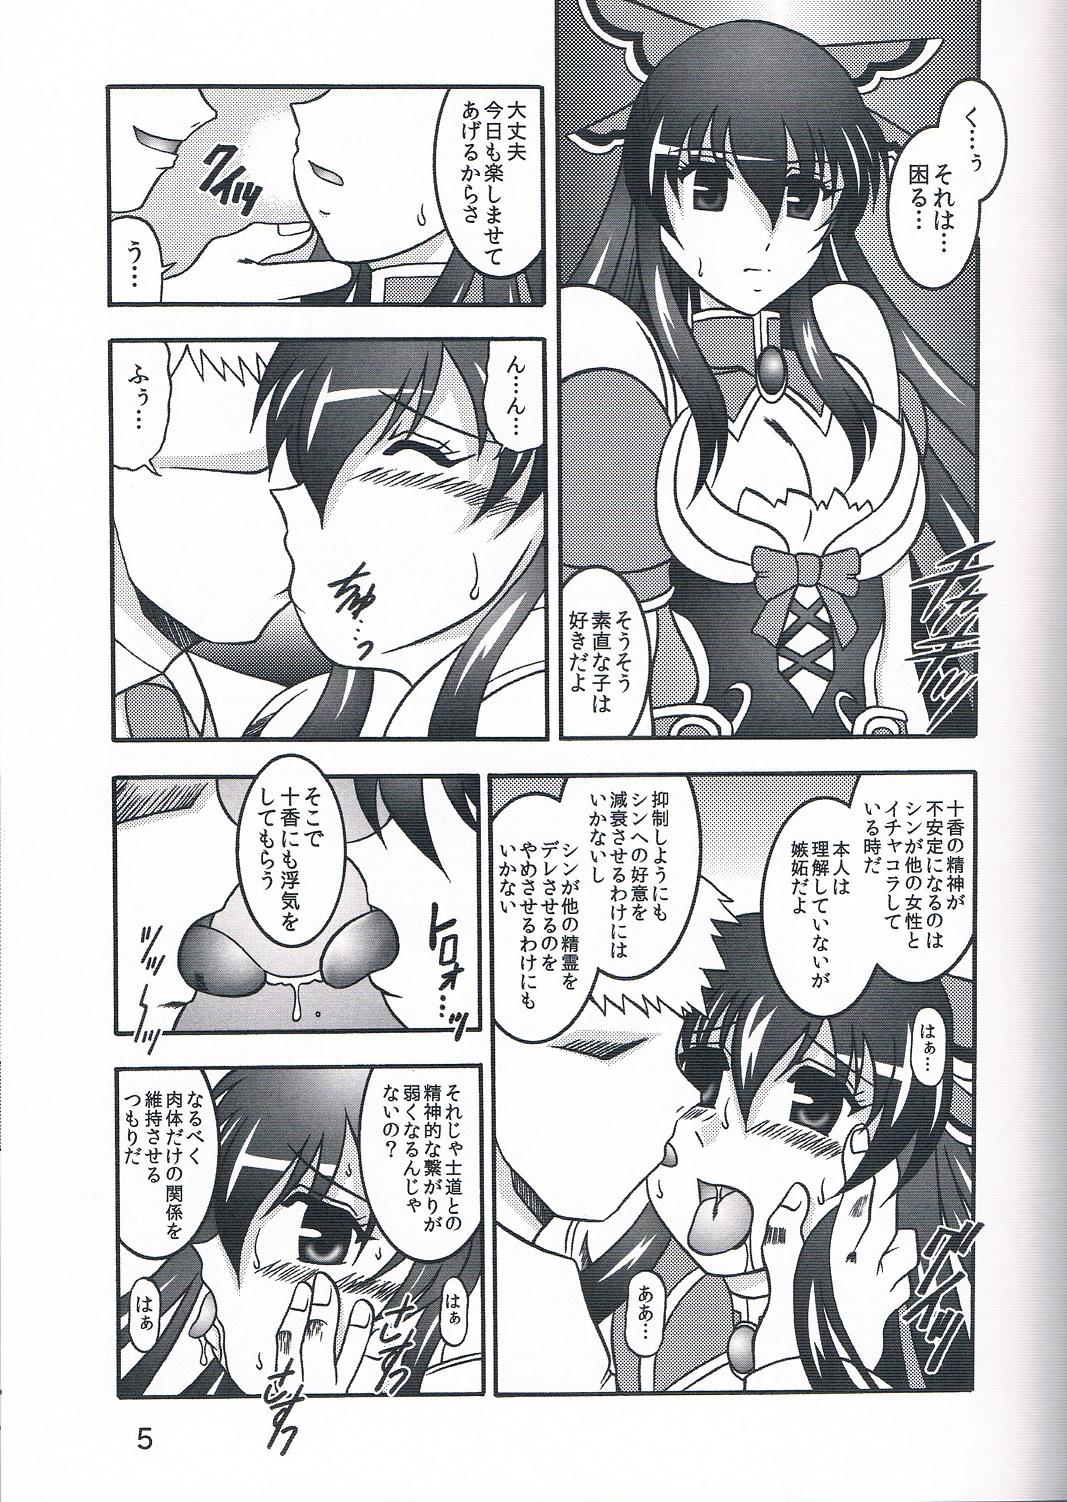 Pussy Greed THE Live - Date a live Chick - Page 4